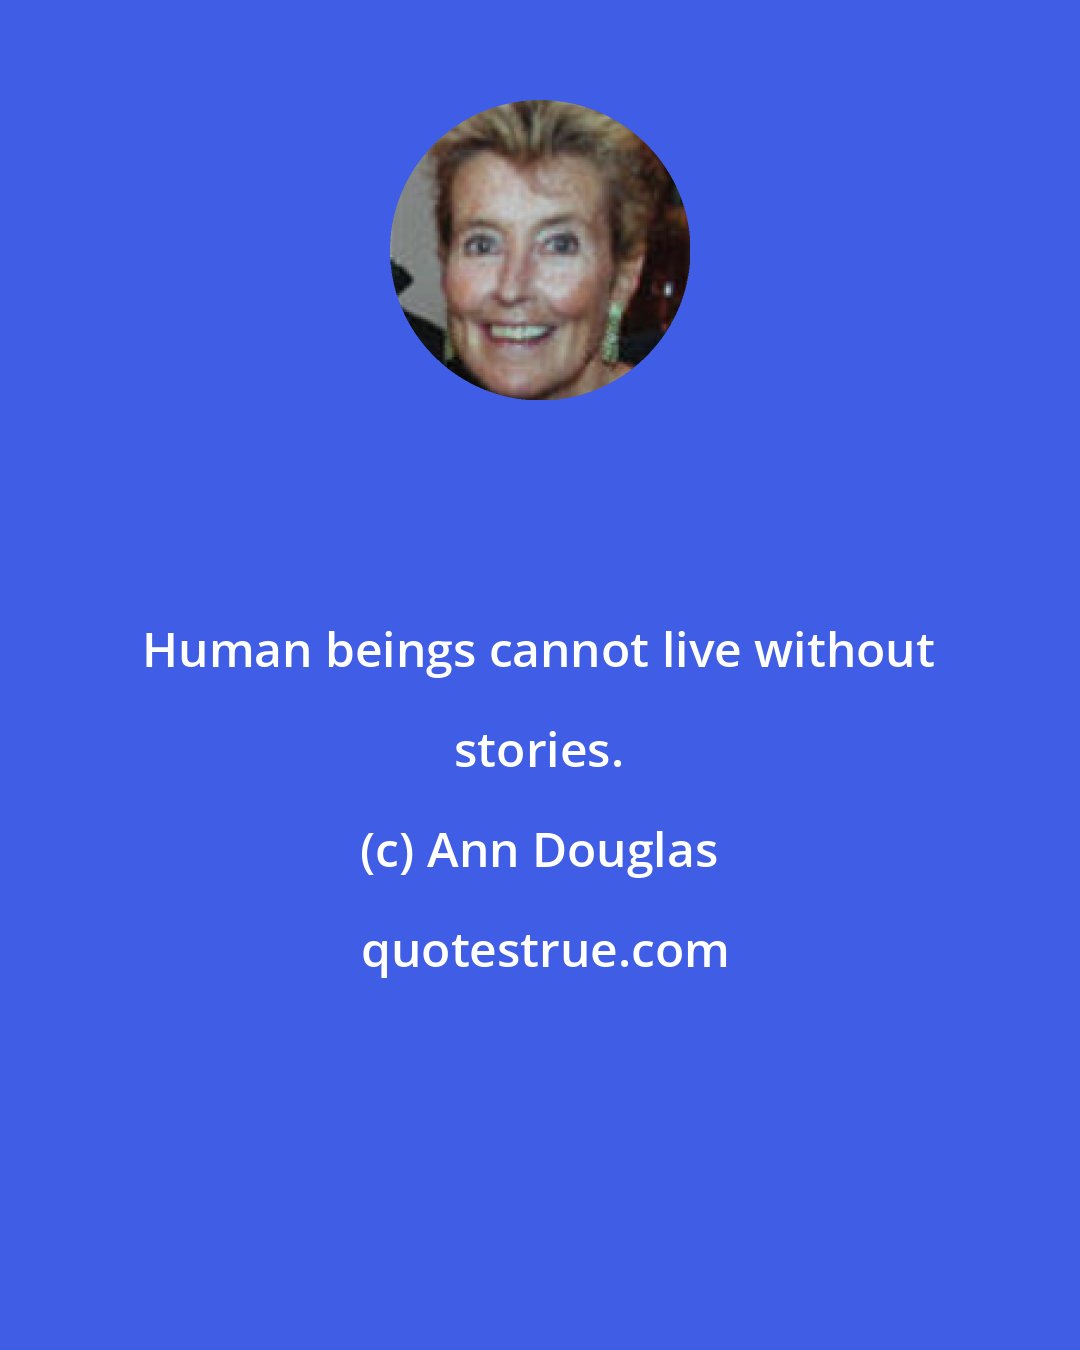 Ann Douglas: Human beings cannot live without stories.